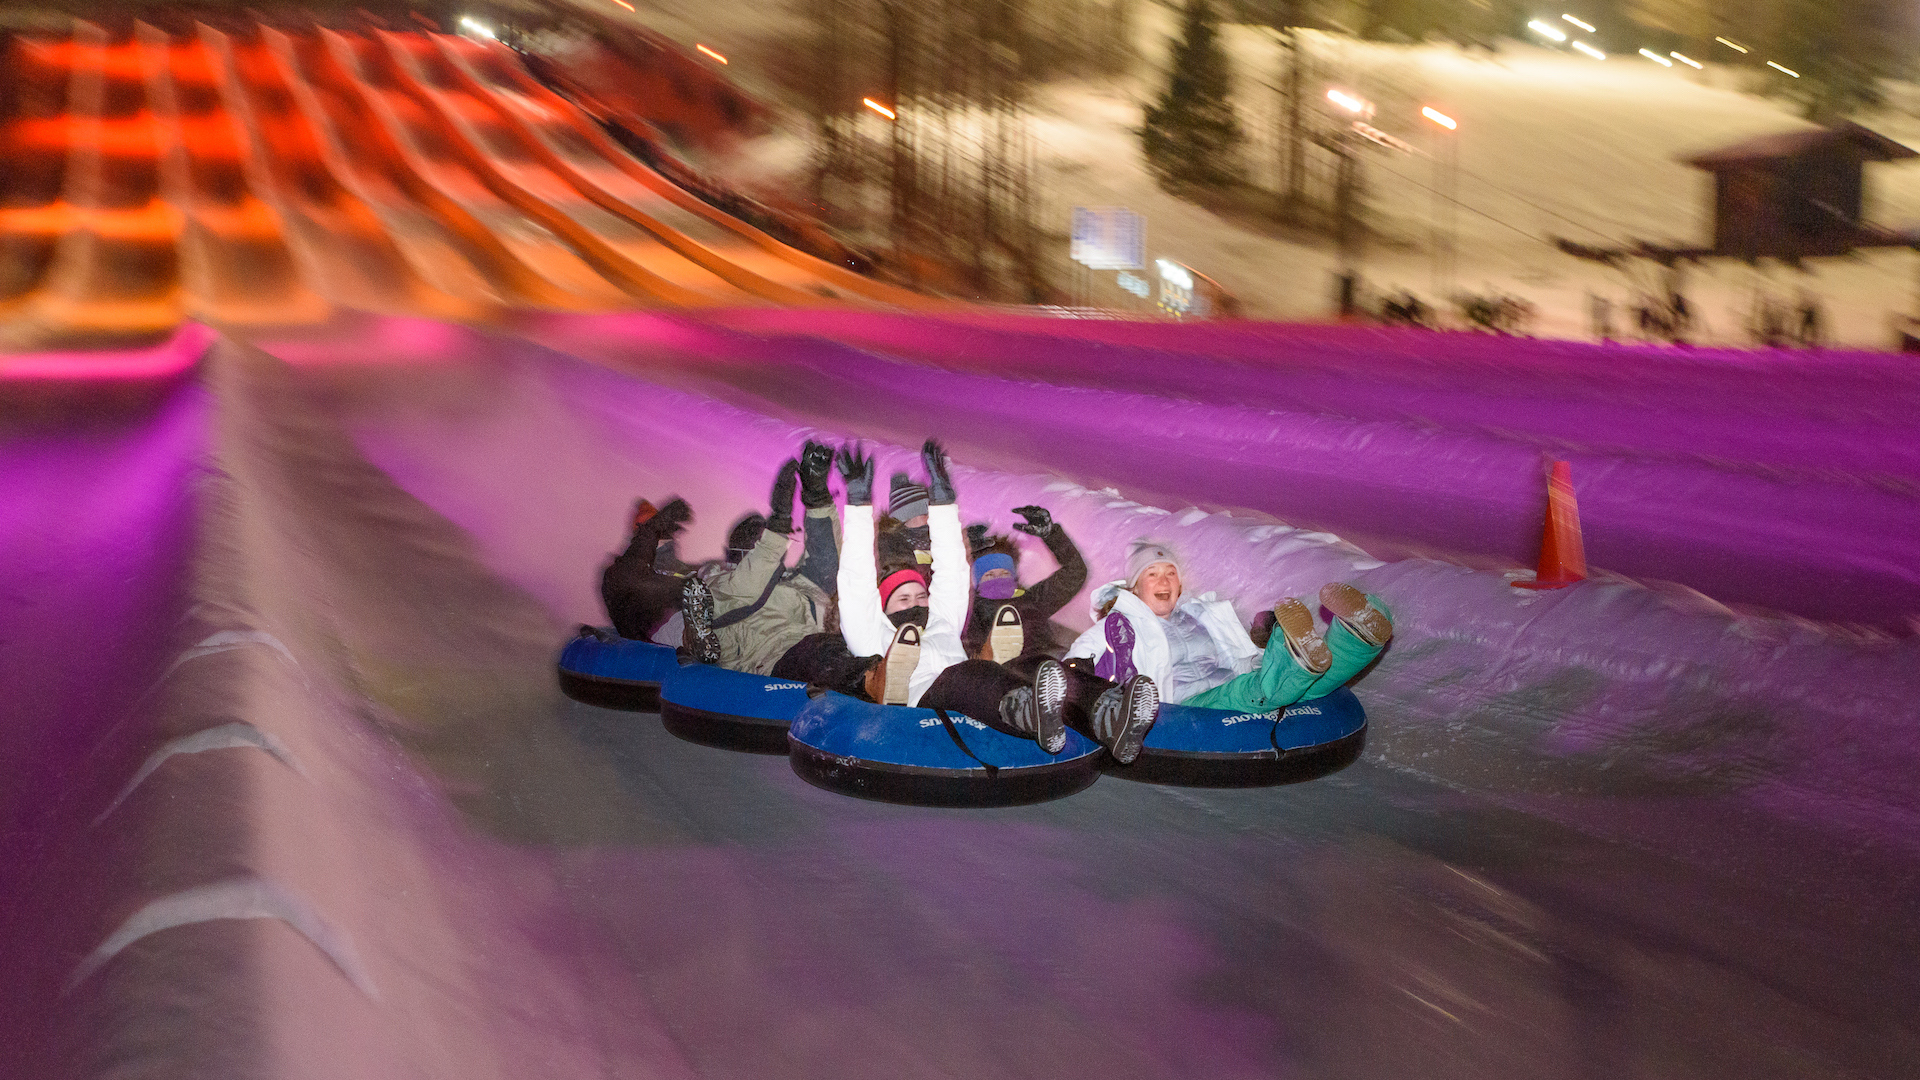 Reserve Your Tubing Tickets Now!